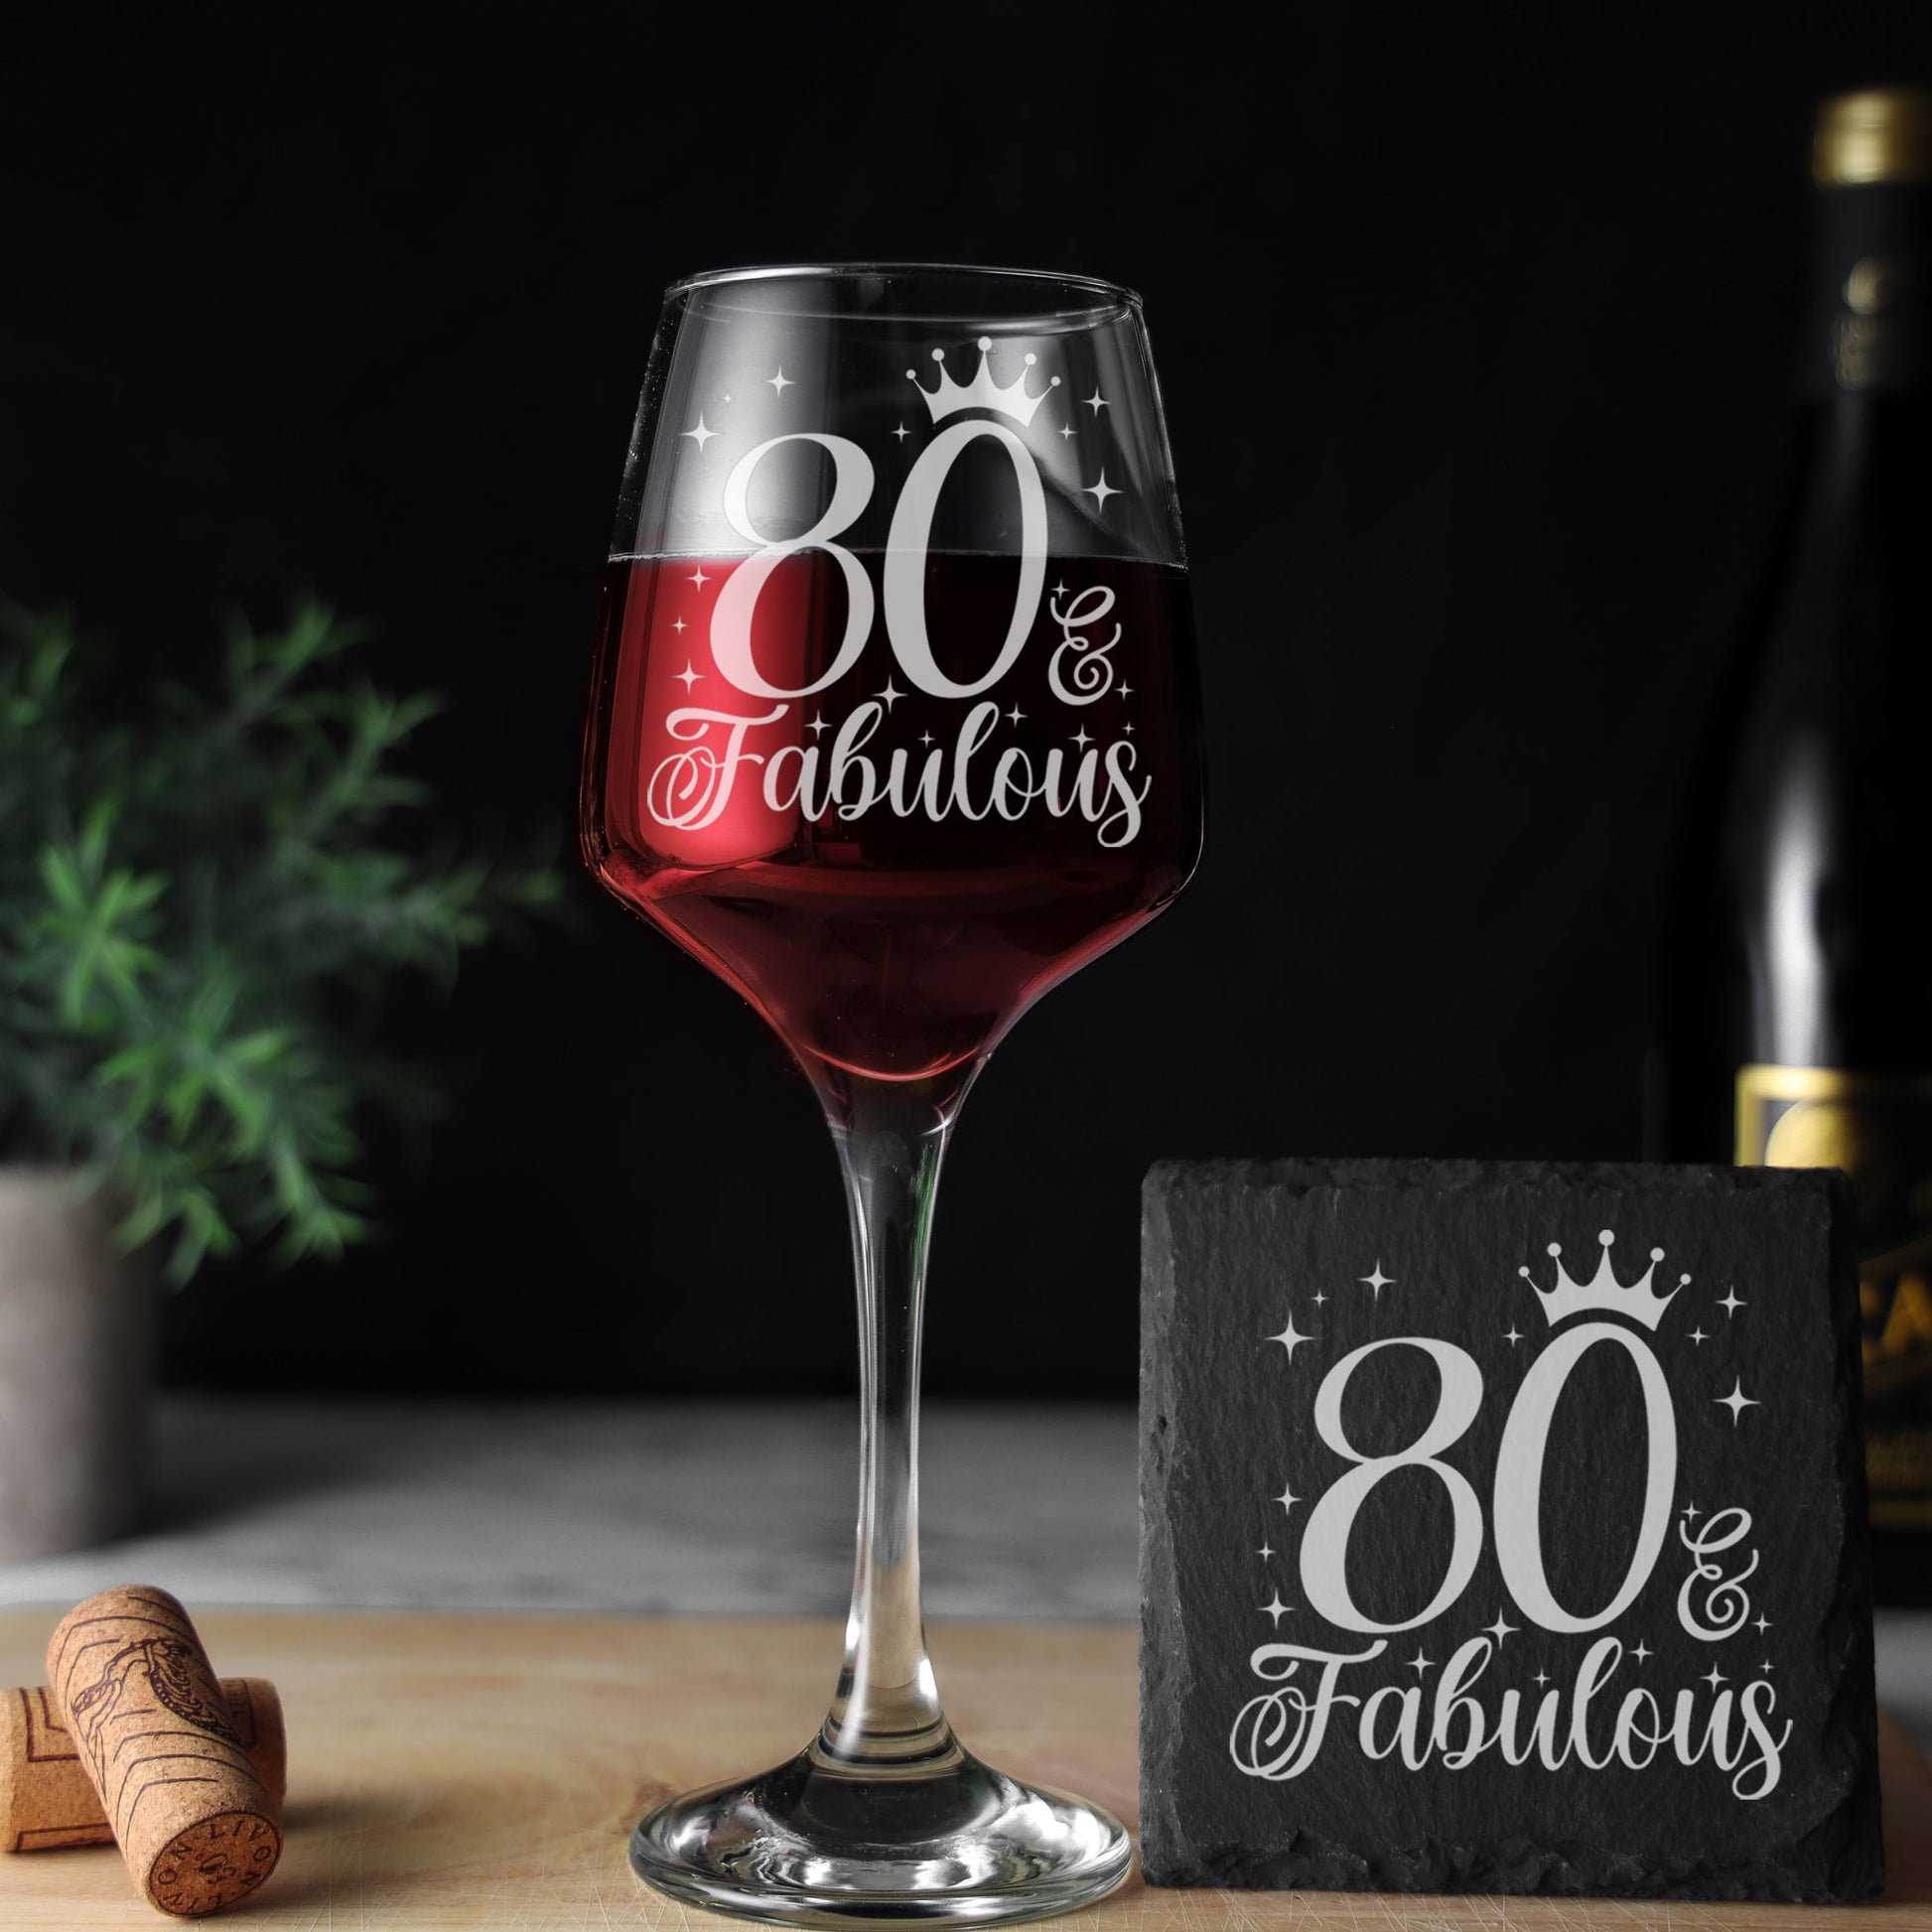 80 & Fabulous 80th Birthday Gift Engraved Wine Glass and/or Coaster Set  - Always Looking Good - Glass & Square Coaster  